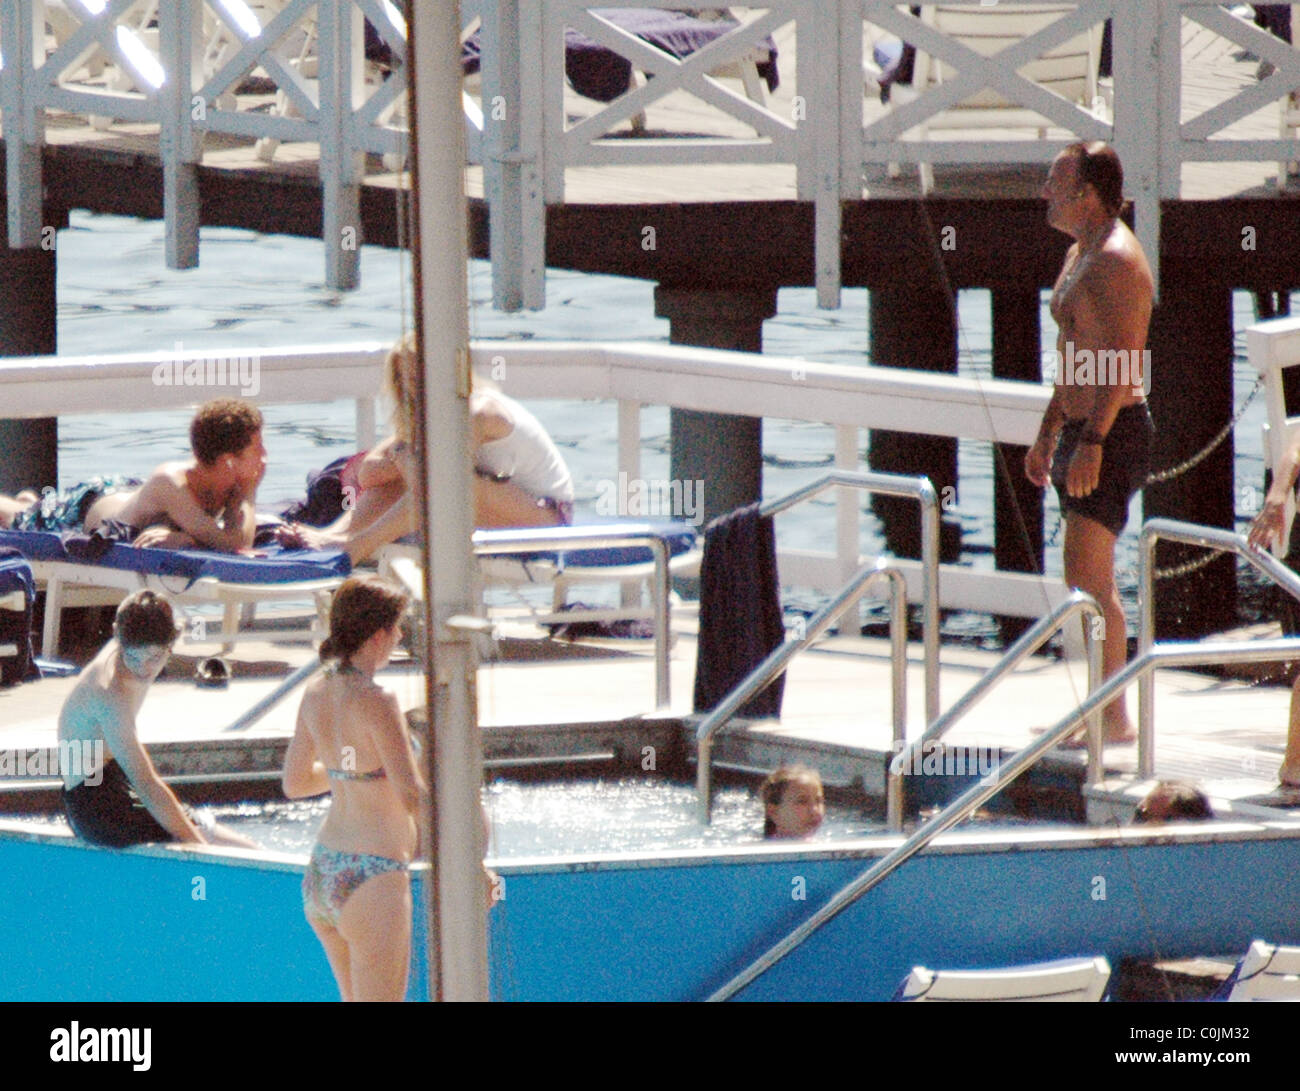 Bruce Springsteen on holiday with his wife Patti Scialfa and children  Cernobbio, Italy - 24.07.08 Stock Photo - Alamy